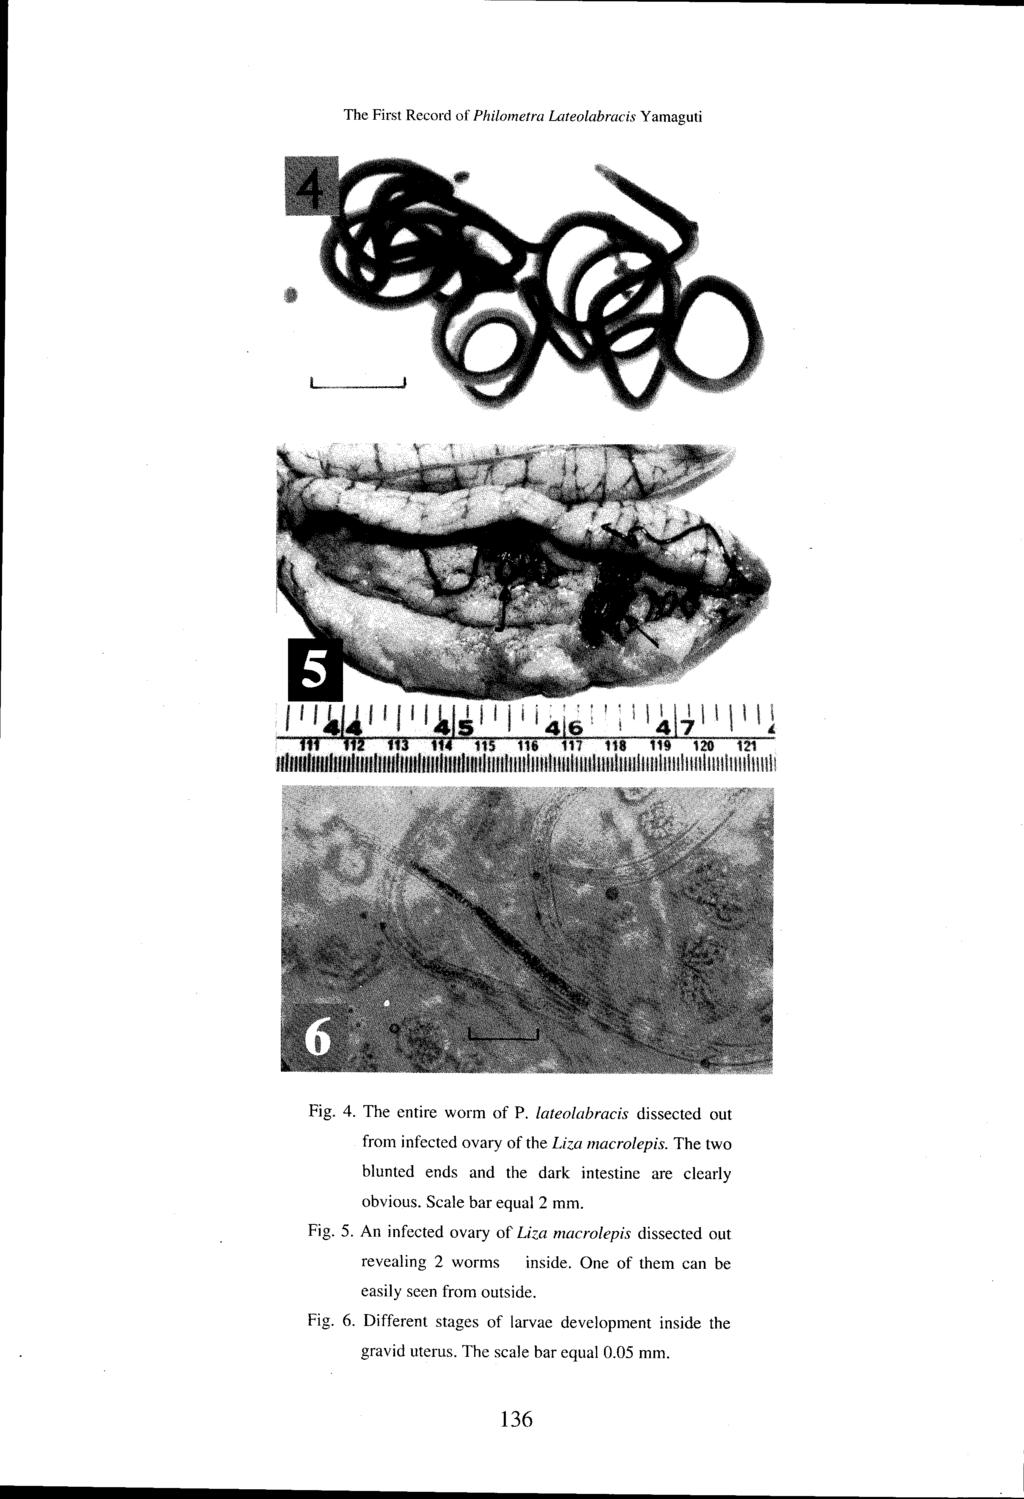 The First Record of Philometra Lateolabracis Y amaguti Fig. 4. The entire worm of P. lateolabracis dissected out from infected ovary of the Liza macrolepis.